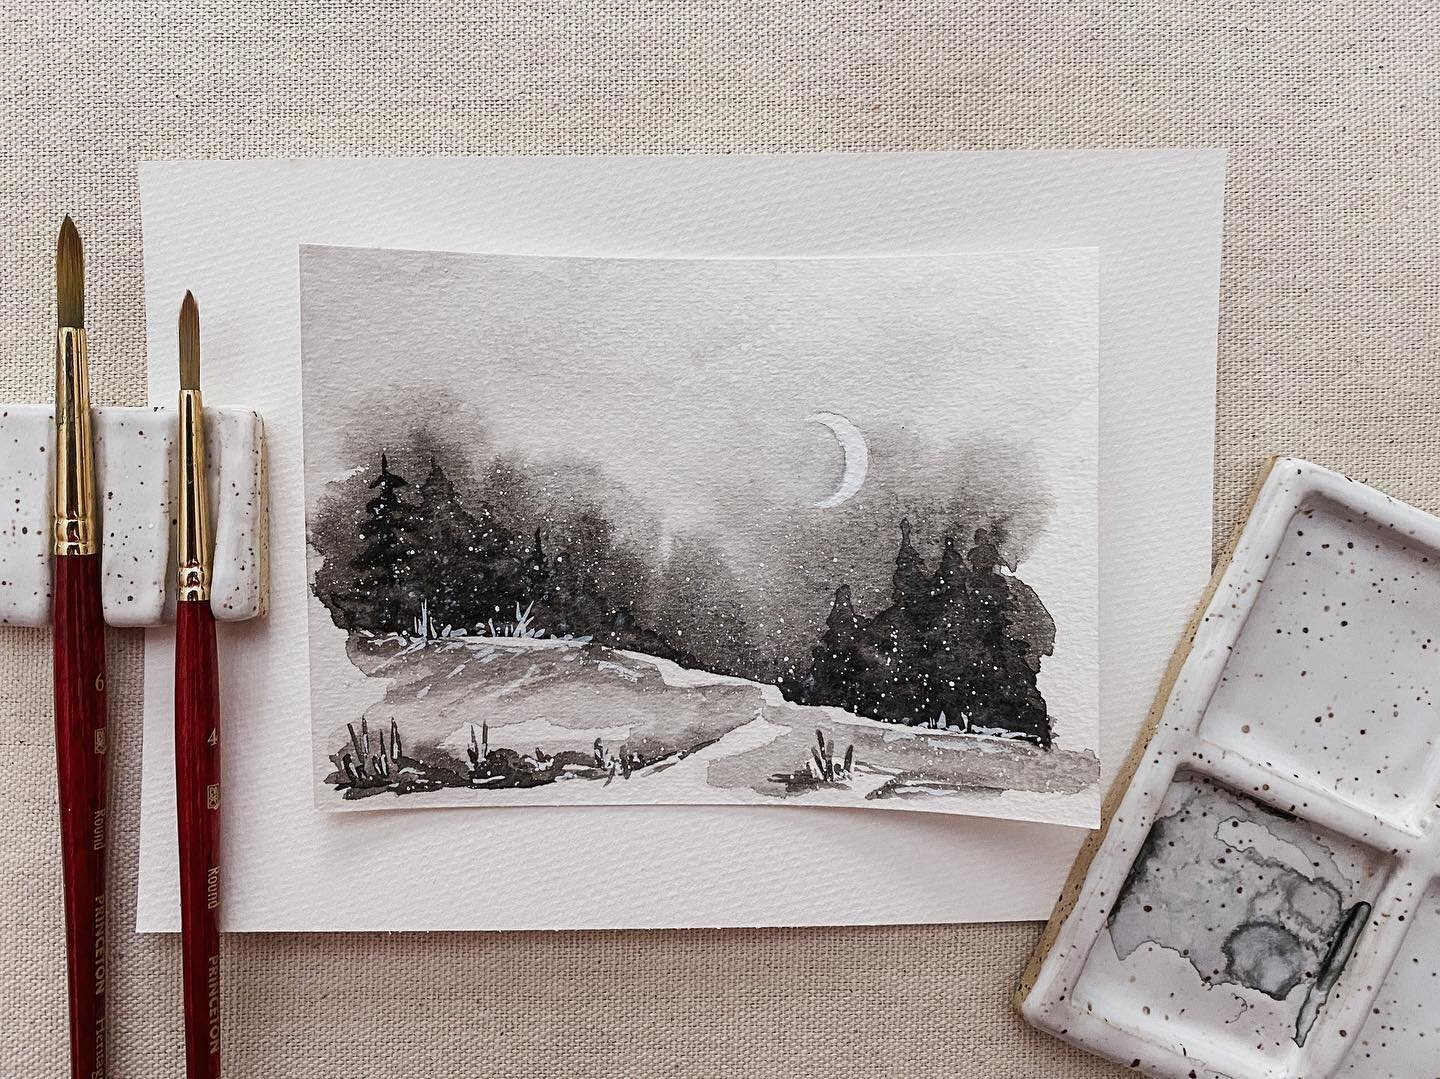 24/100 🎨 Blending styles today to create this painting - you can see the beauty of simplicity in the gestures that shape the landscape and the natural, organic flow of the watercolors as they do their thing 🤍 I adore black &amp; white art, photogra